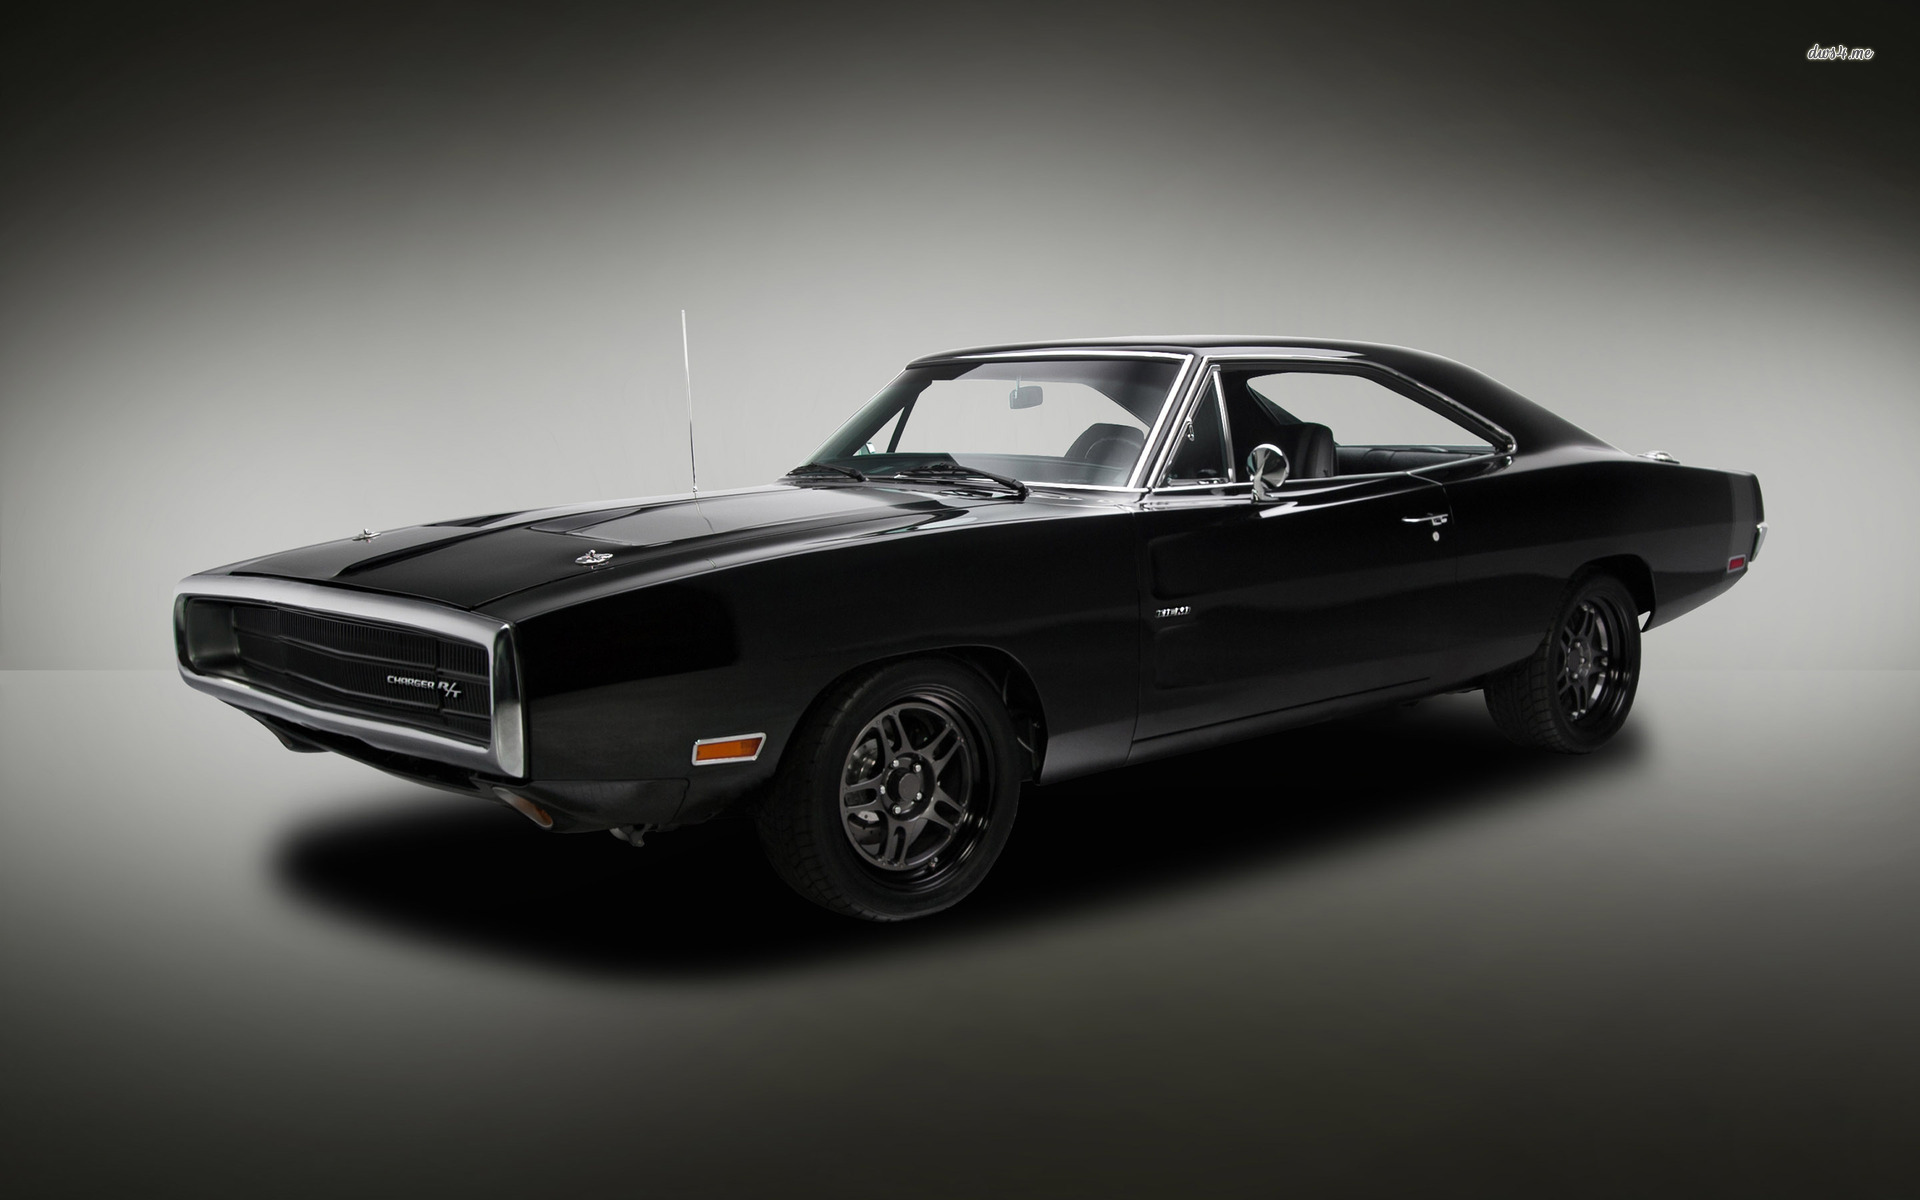 69 Dodge Charger Wallpaper - HD Wallpapers (High Definition)